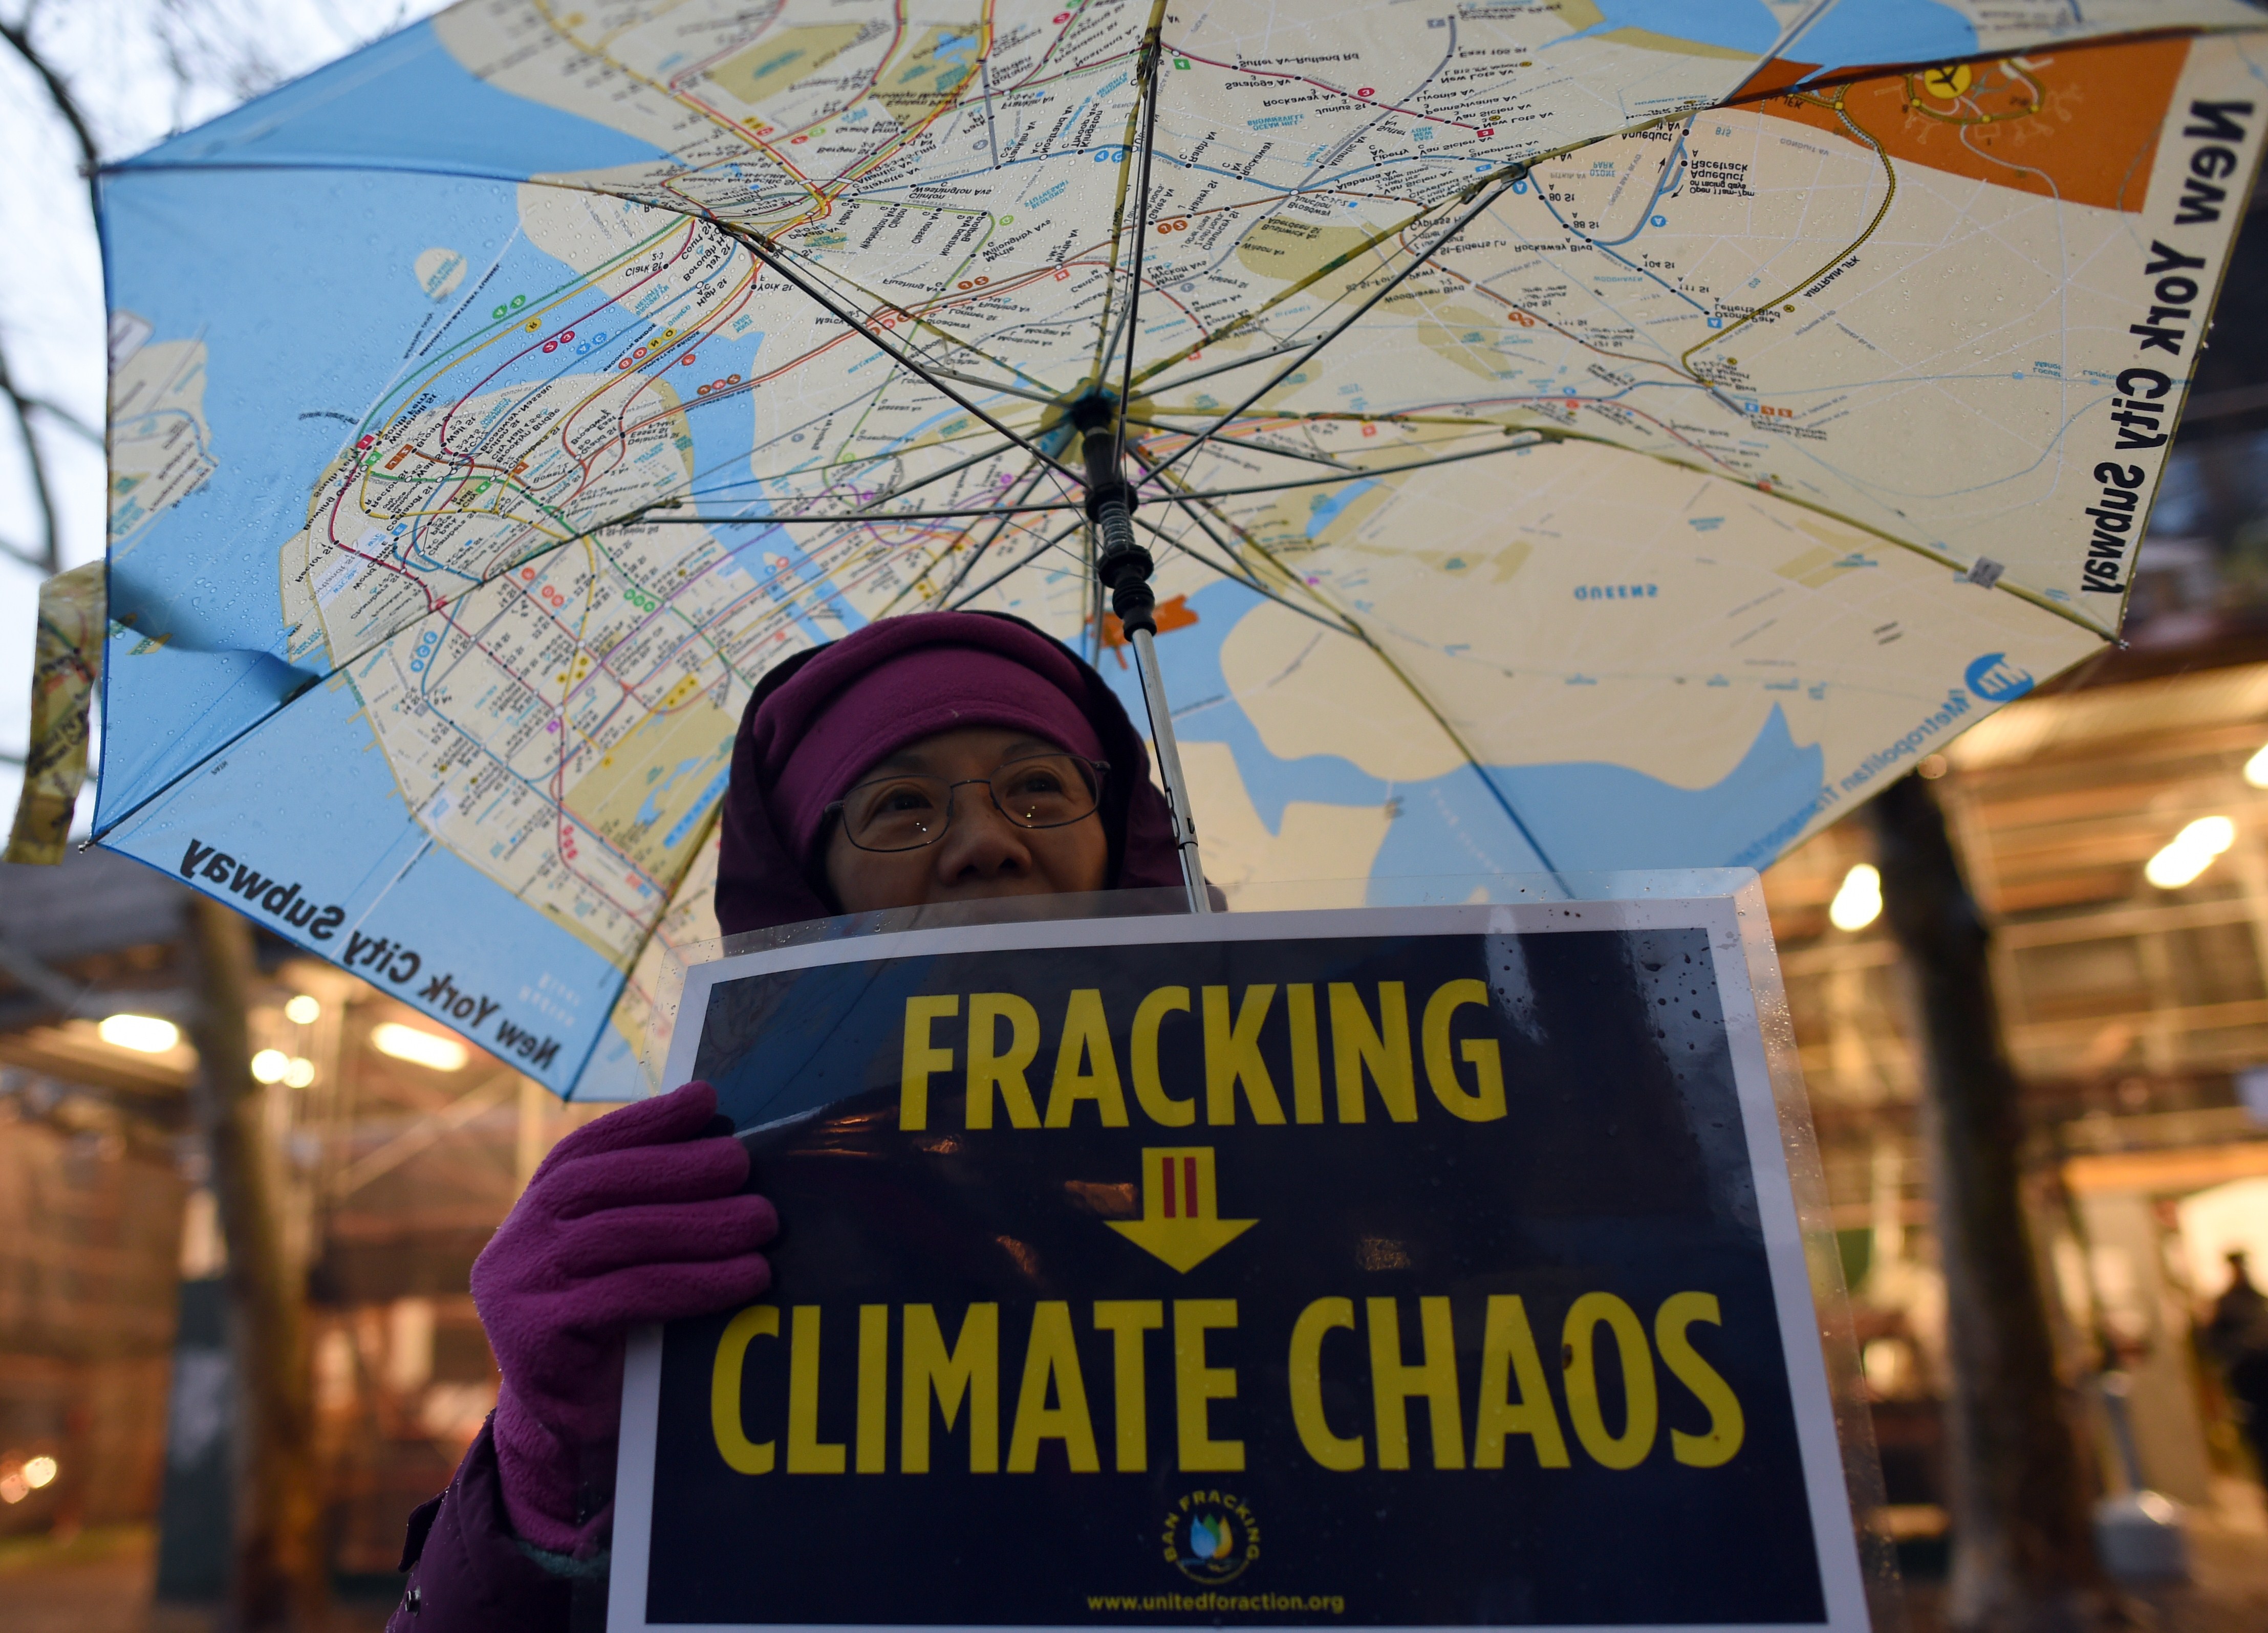 A woman holds an anti-fracking sign as a group of demonstrators gather for a rally for a Global Climate Treaty on Dec. 10, 2014 in New York City. (DON EMMERT—AFP/Getty Images)